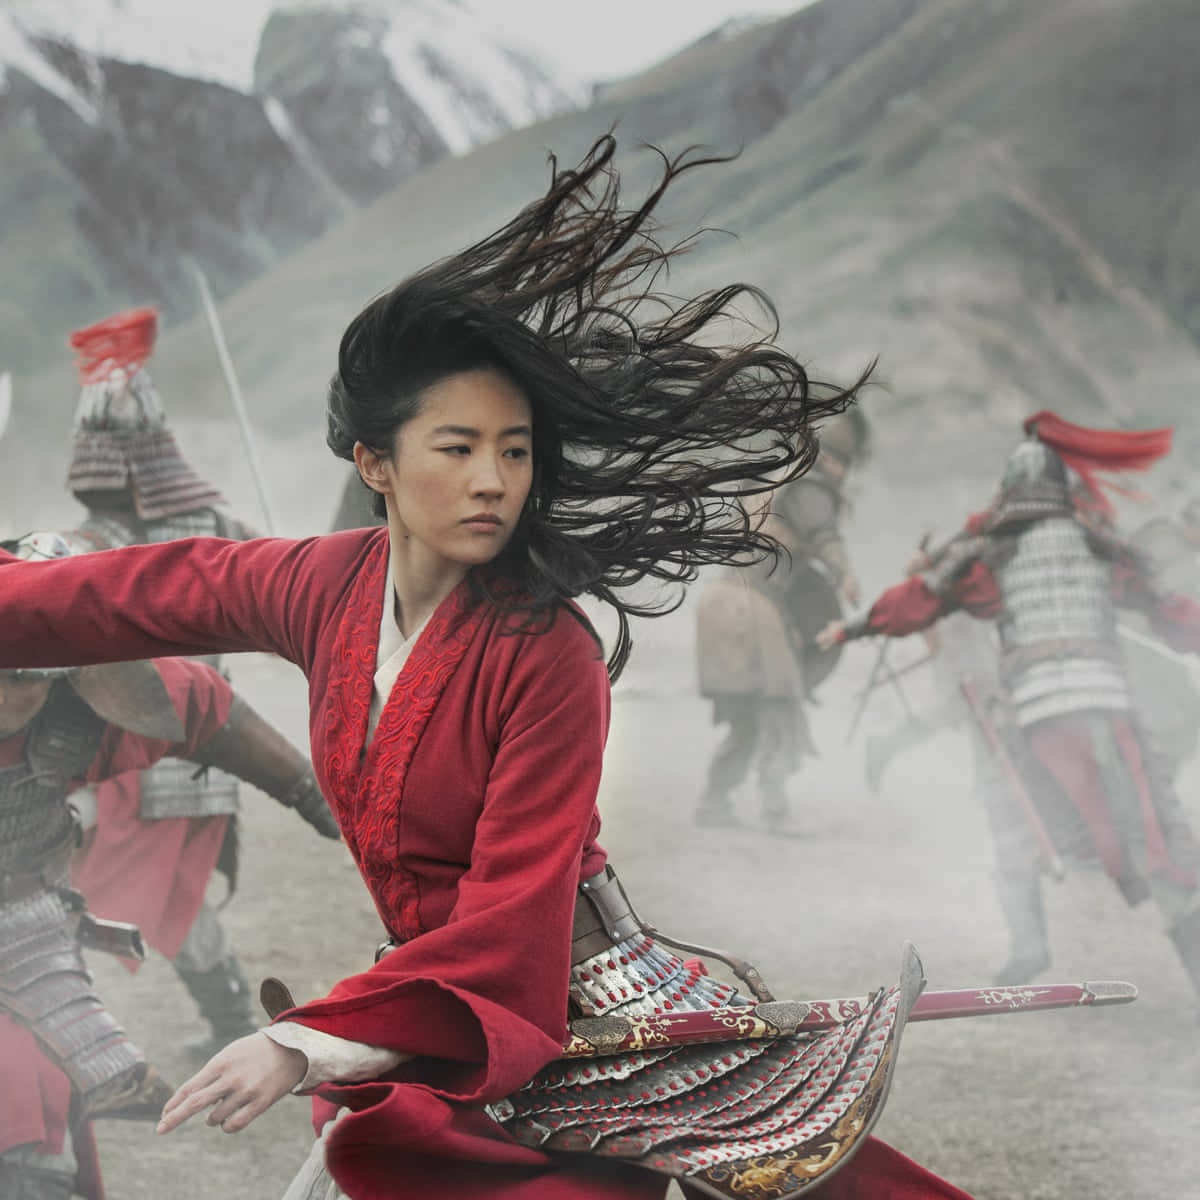 Mulan - A Woman In Red Costume Fighting With Swords